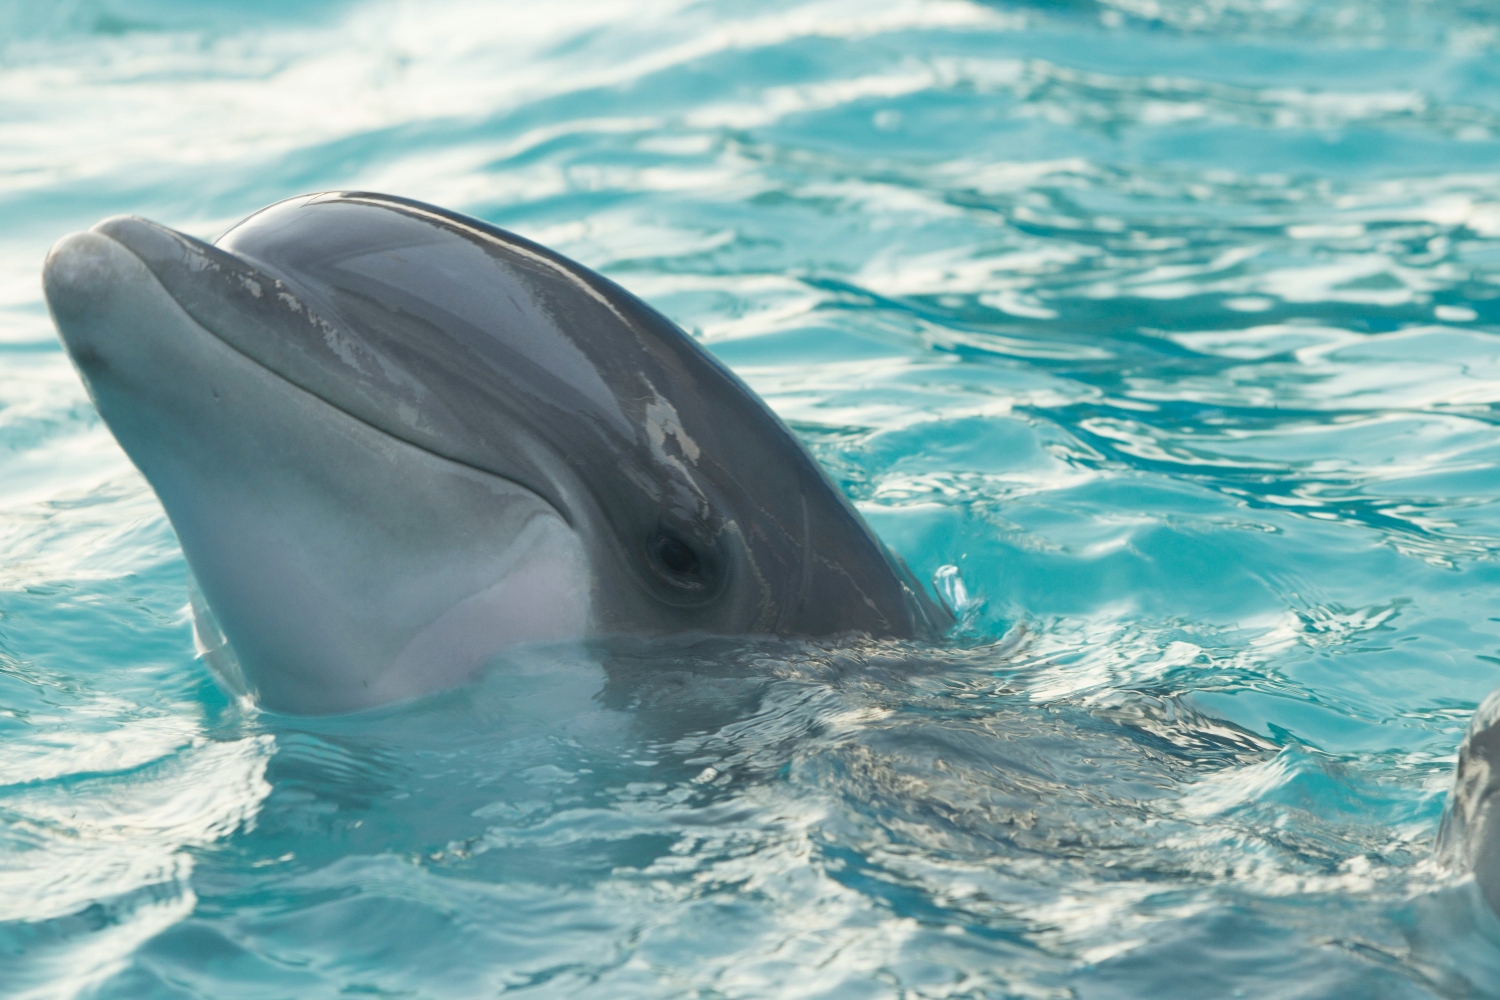 Photograph shows a dolphin head poking out above the water